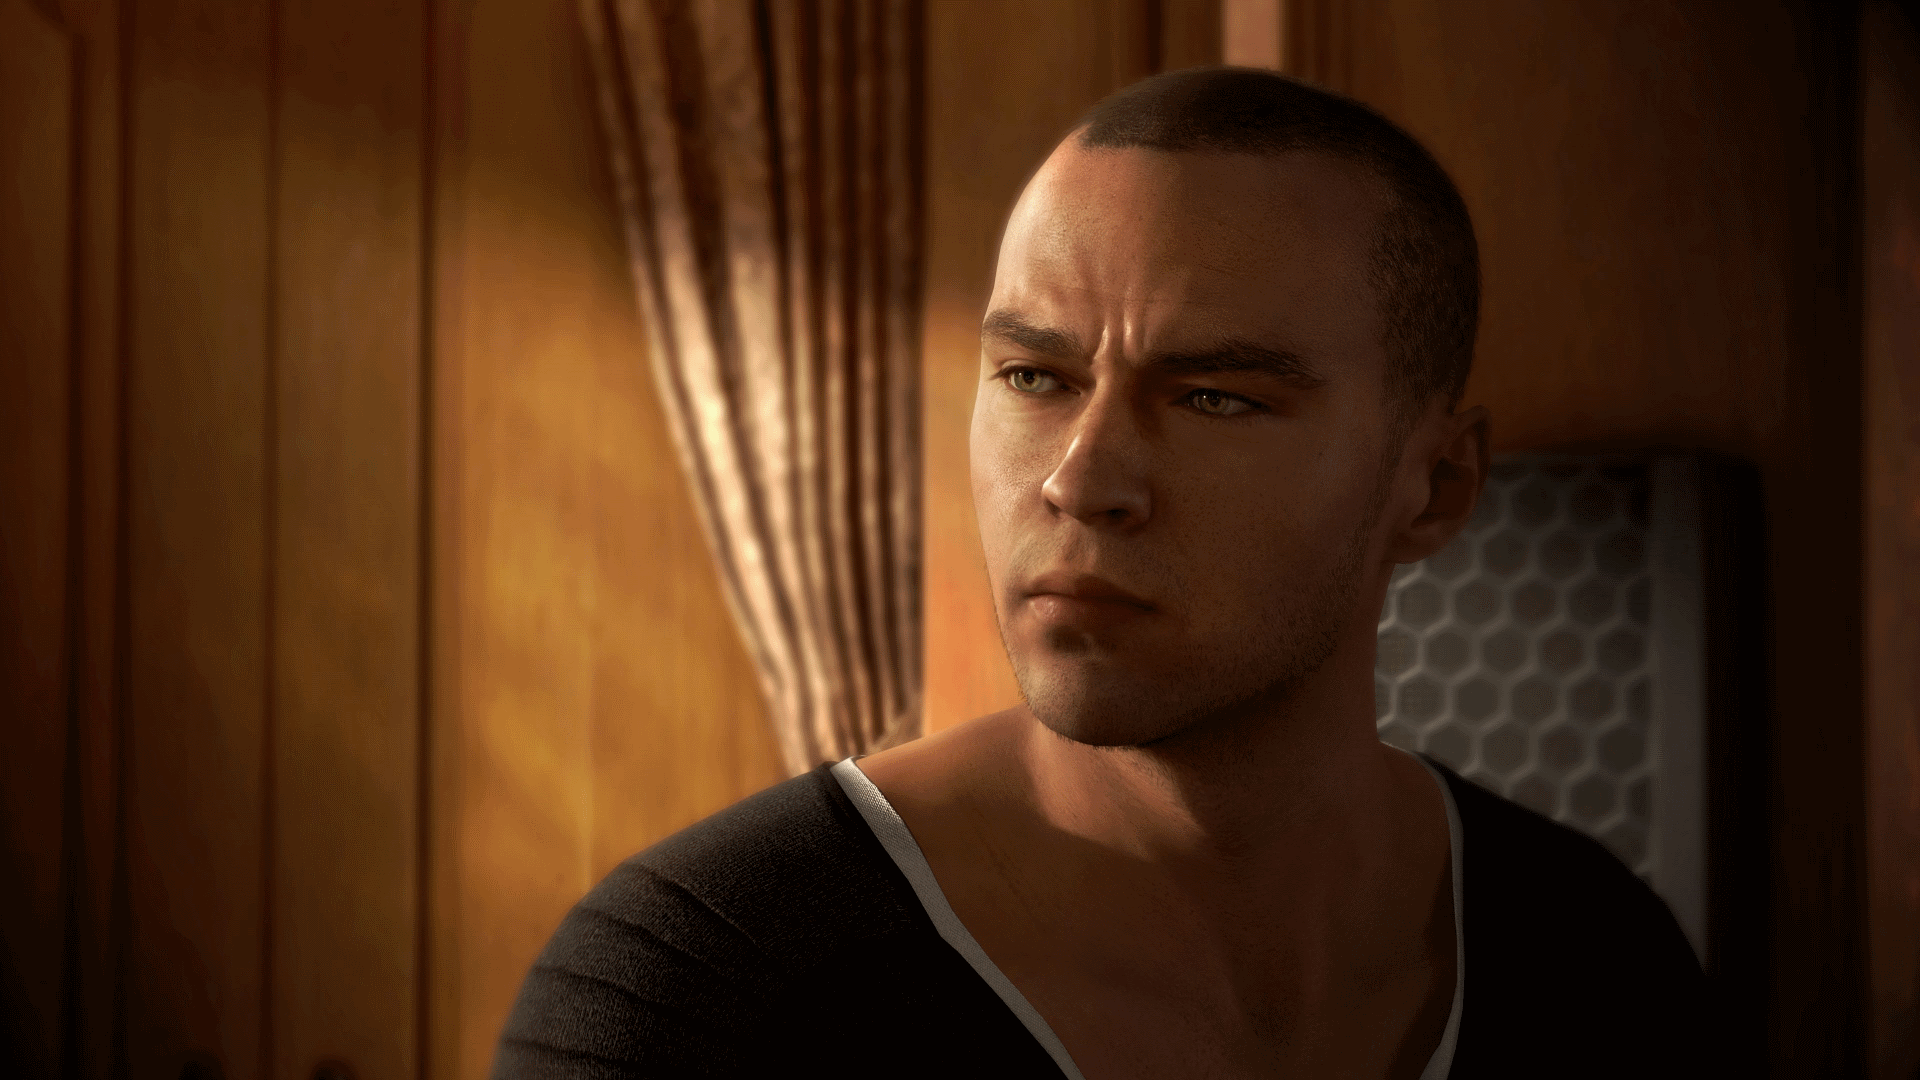 Detroit: Become Human in Pictures (Part 2) [Full Screenshot Collection] : r/ DetroitBecomeHuman